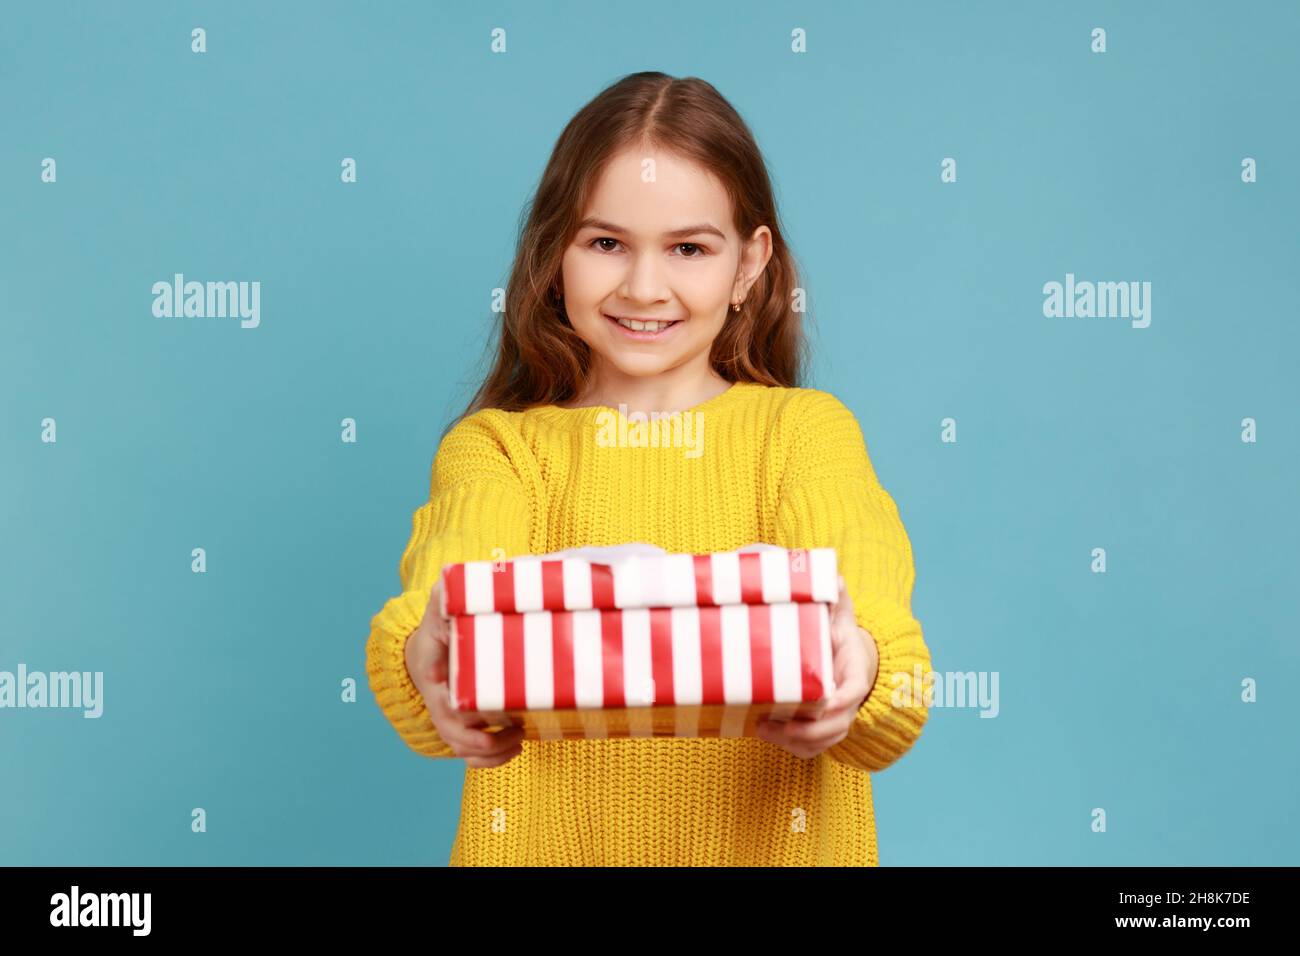 Little girl giving gift box to camera with smile, child greeting on holiday and sharing present, wearing yellow casual style sweater. Indoor studio shot isolated on blue background. Stock Photo